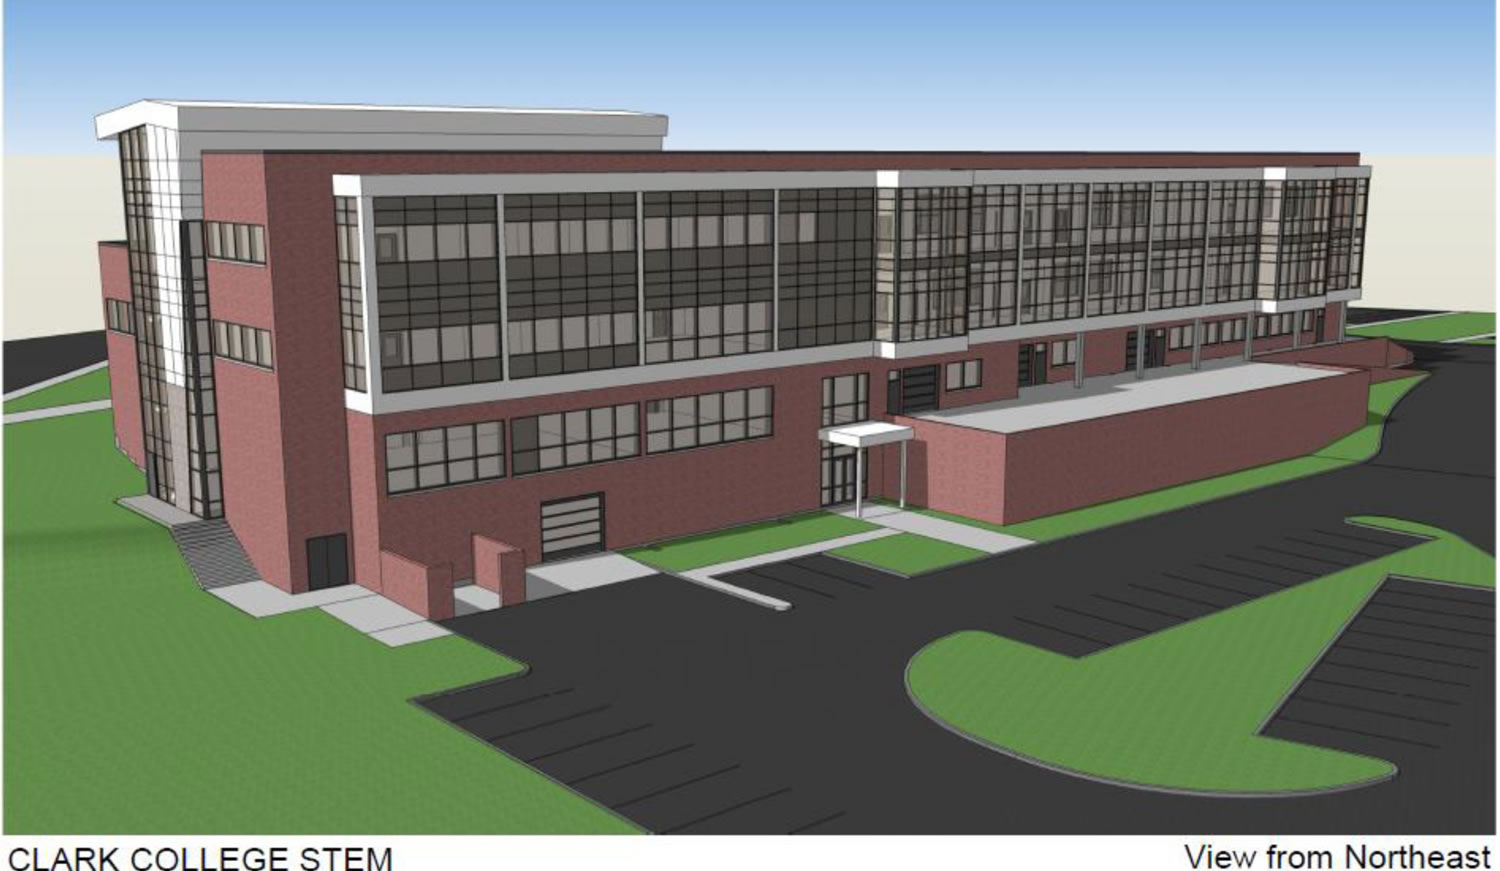 LSW Architects
The state gave Clark College approval to finalize design work on its $38 million Science, Technology, Engineering and Math building.